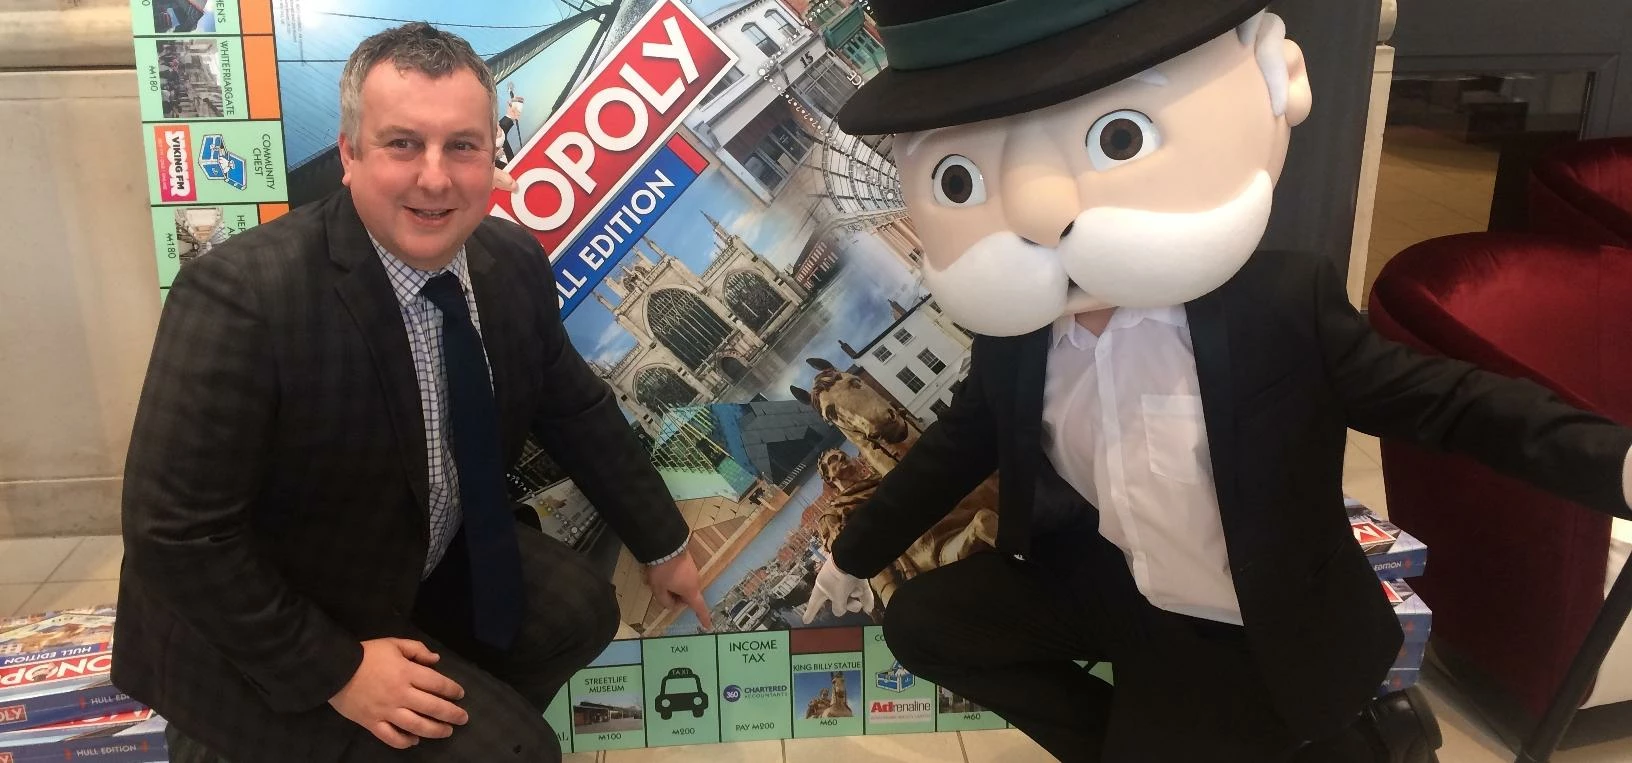 Andy Steele, 360 Director, with Mr Monopoly 